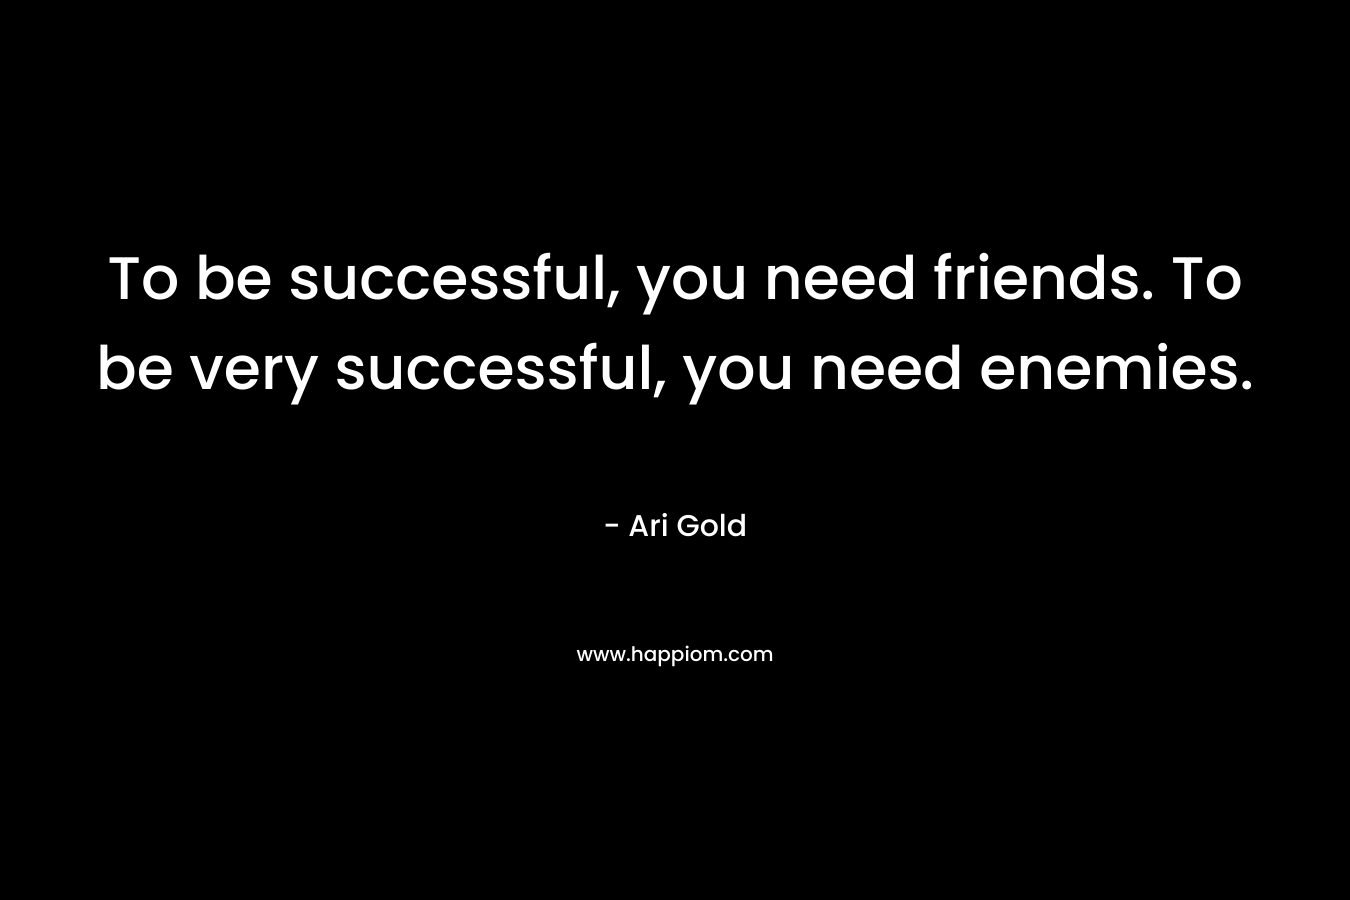 To be successful, you need friends. To be very successful, you need enemies.